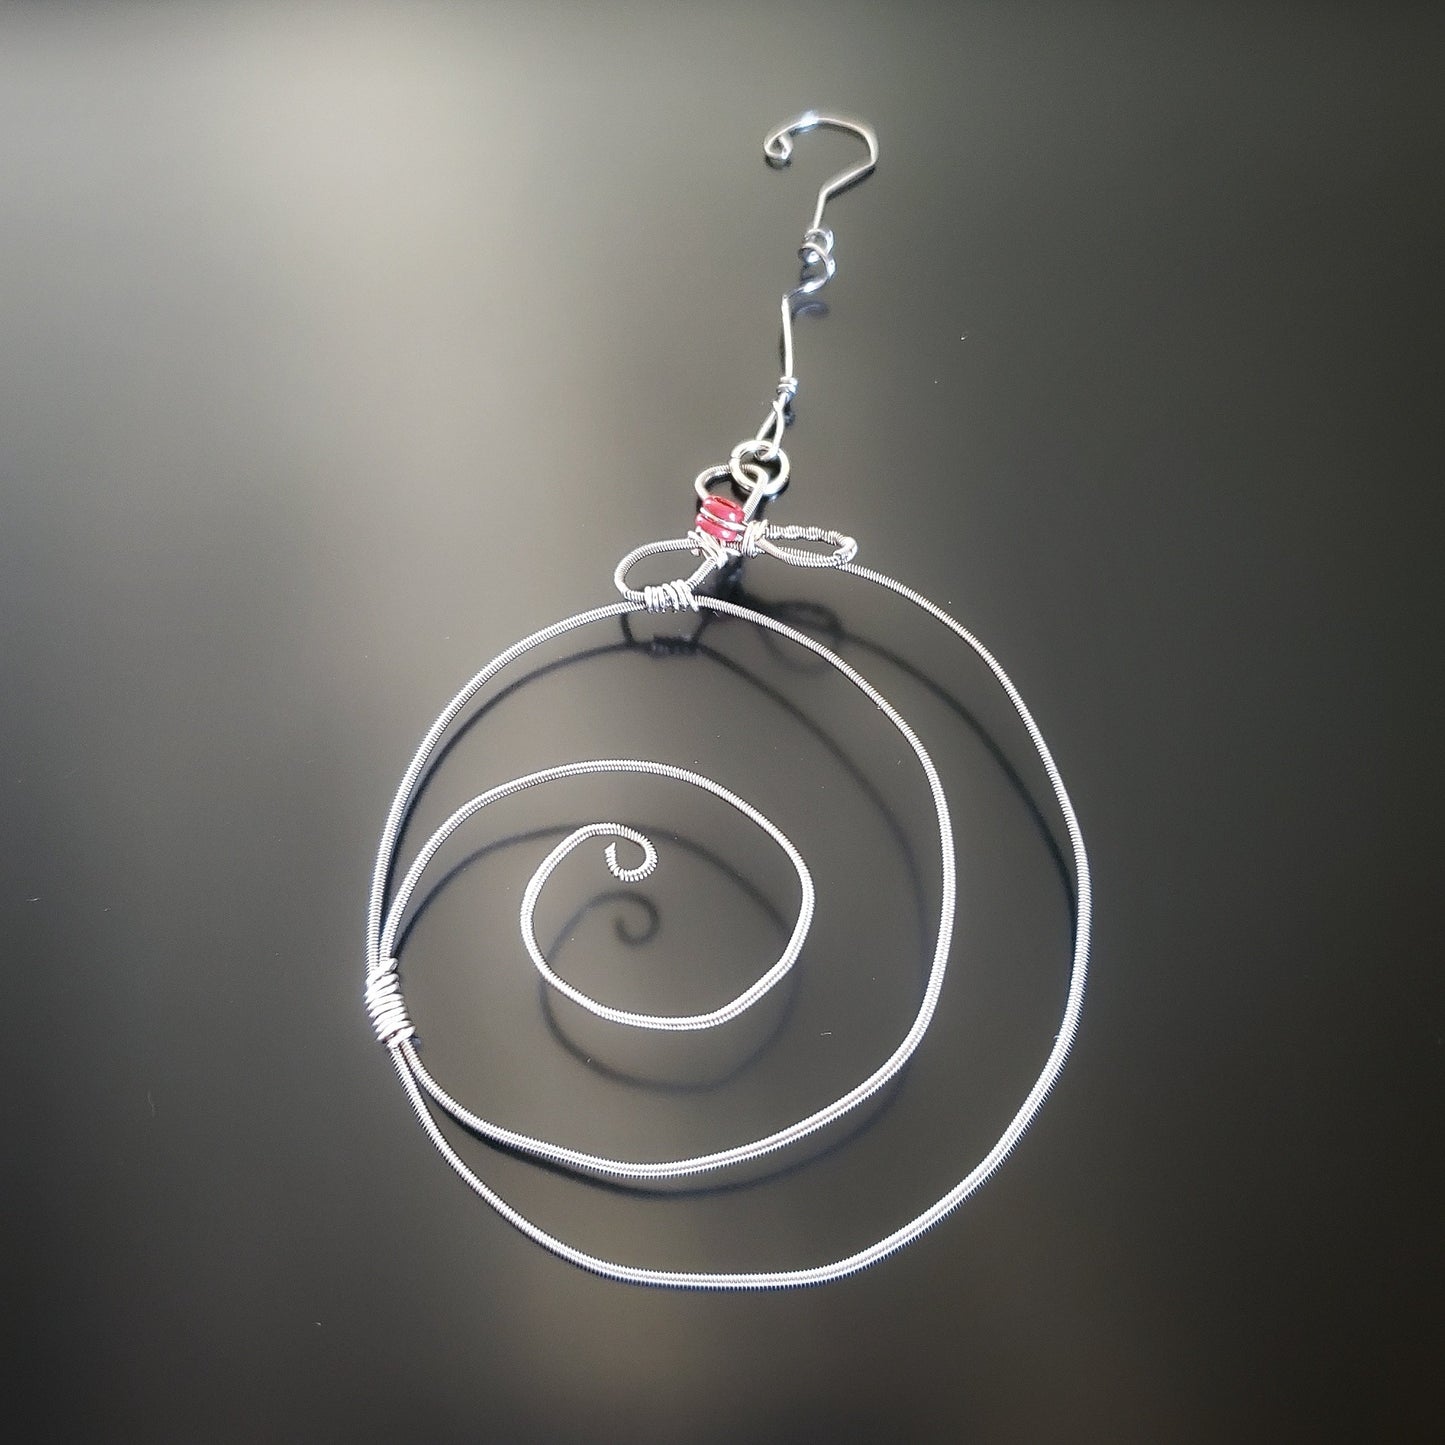 Christmas ornament in the shape of a round swirl made from an upcycled guitar string